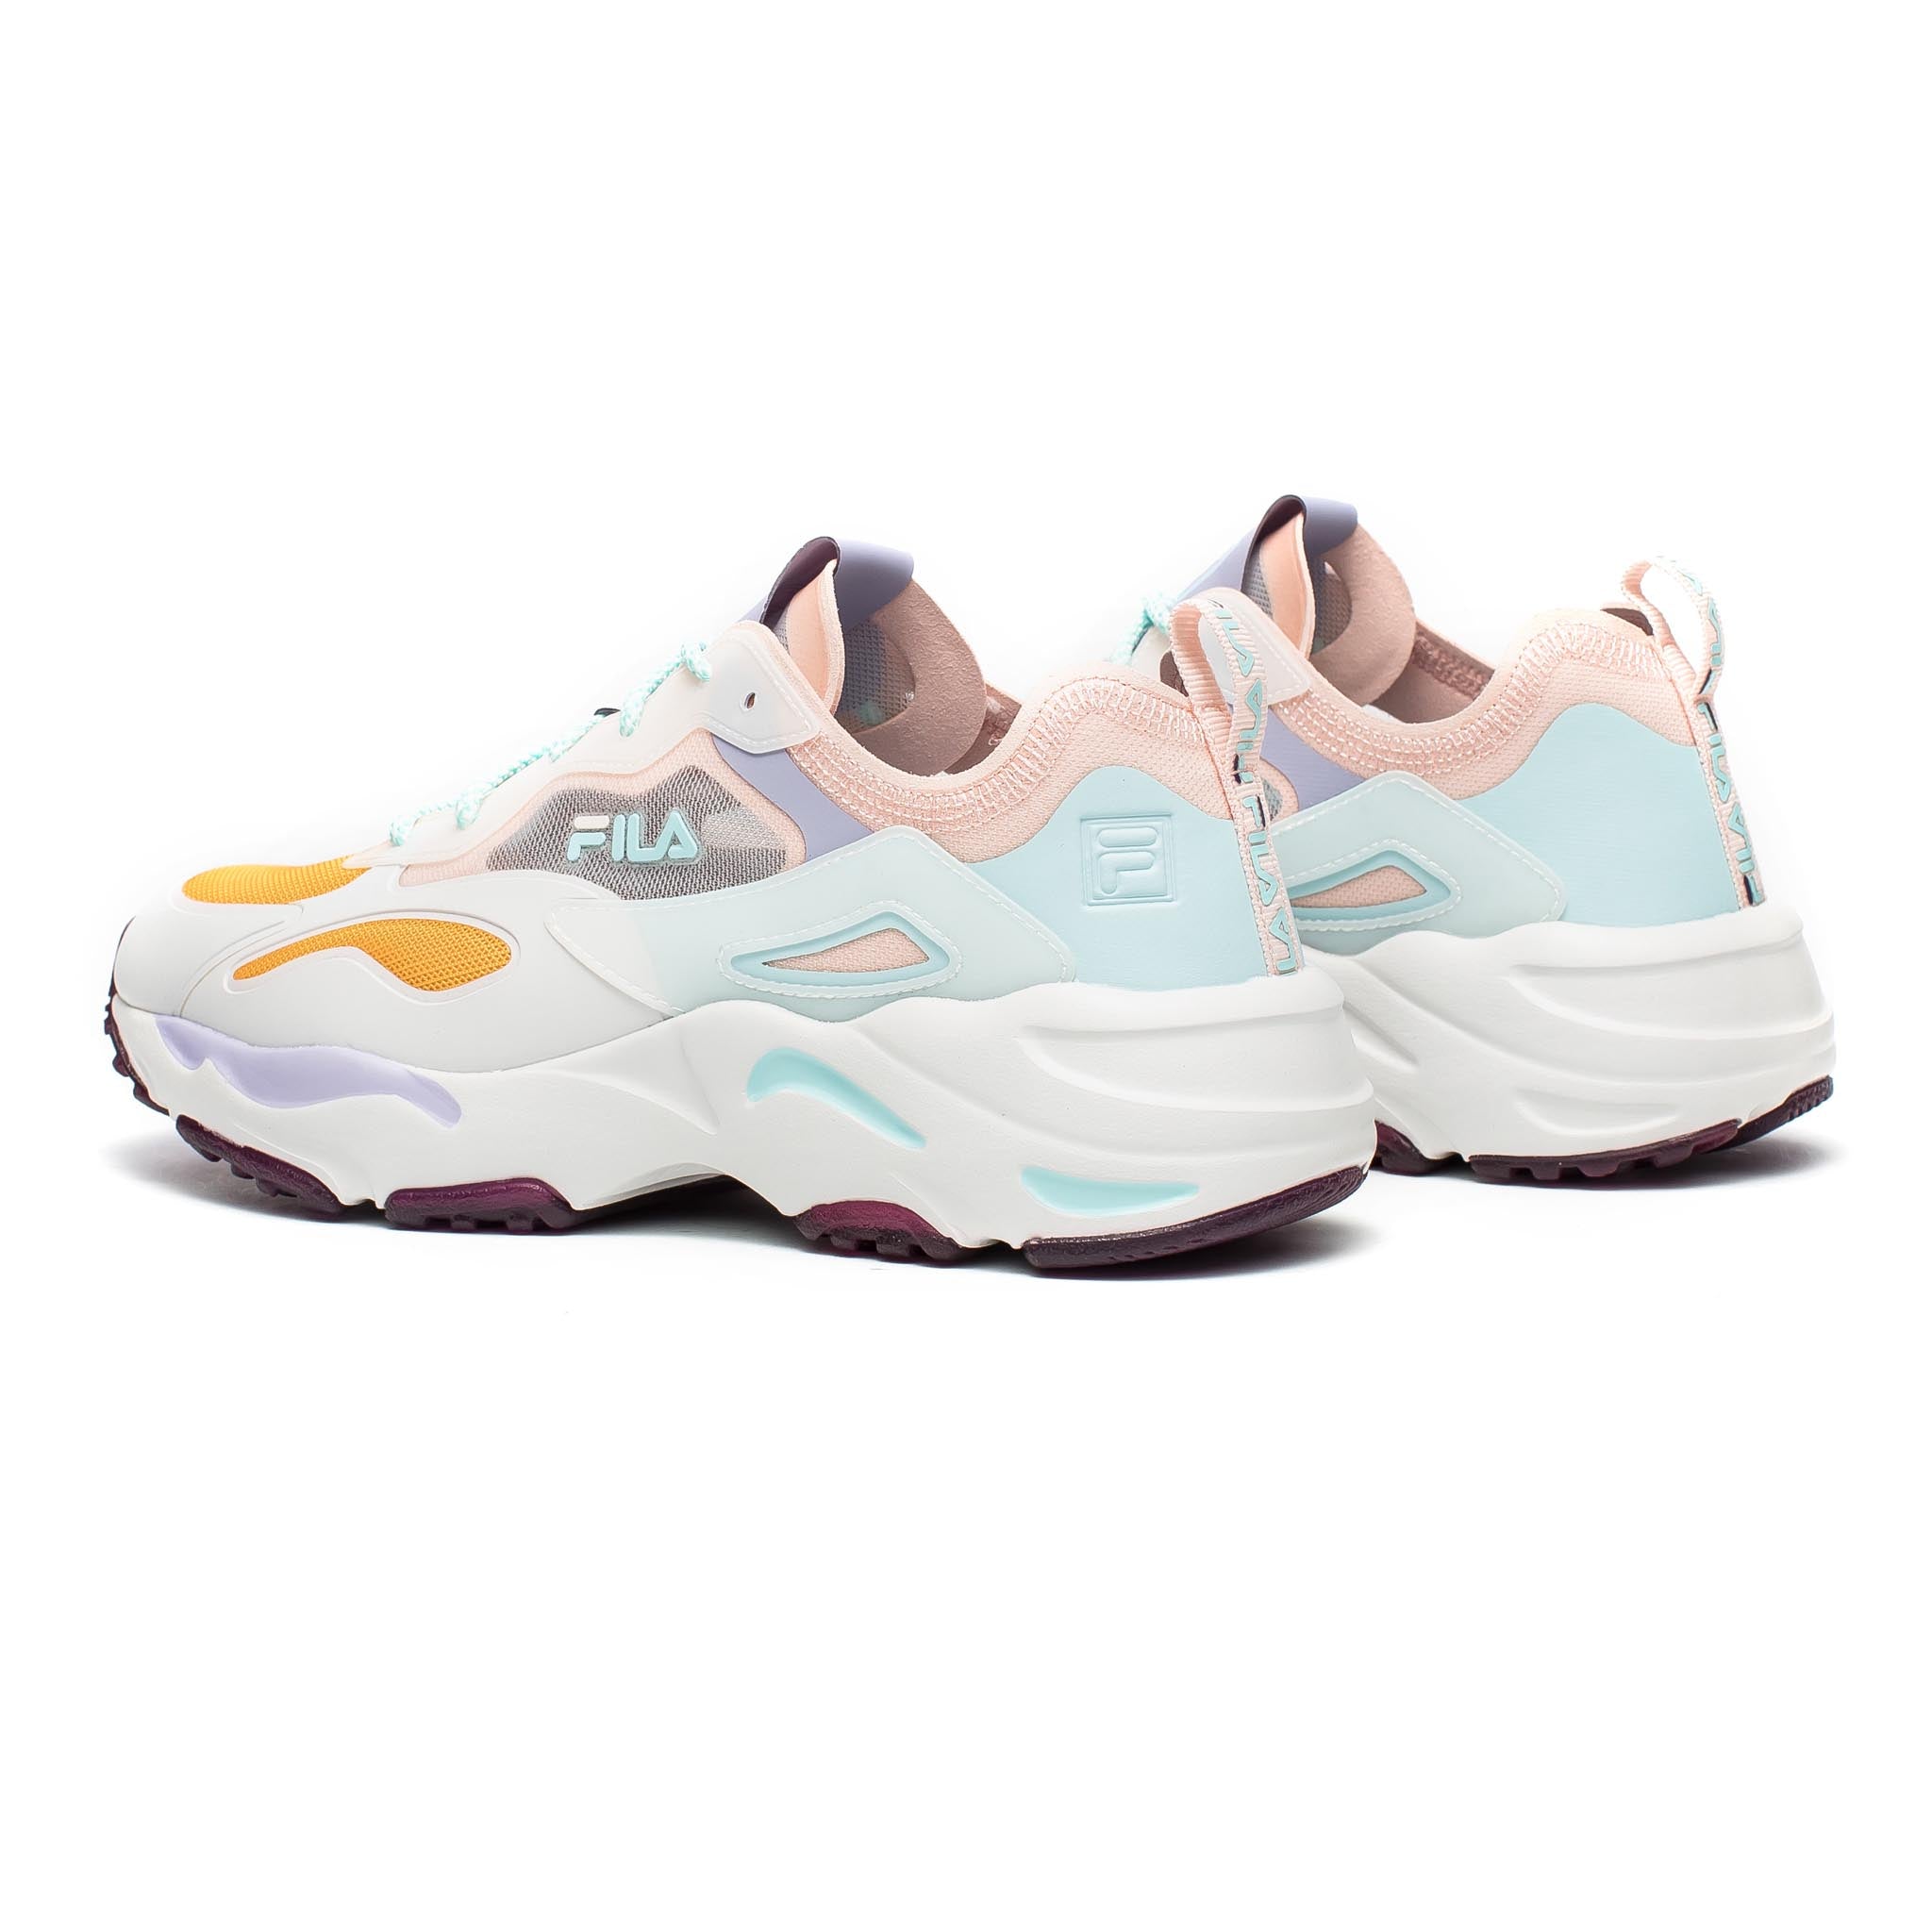 Fila Ray Tracer Lite Pink